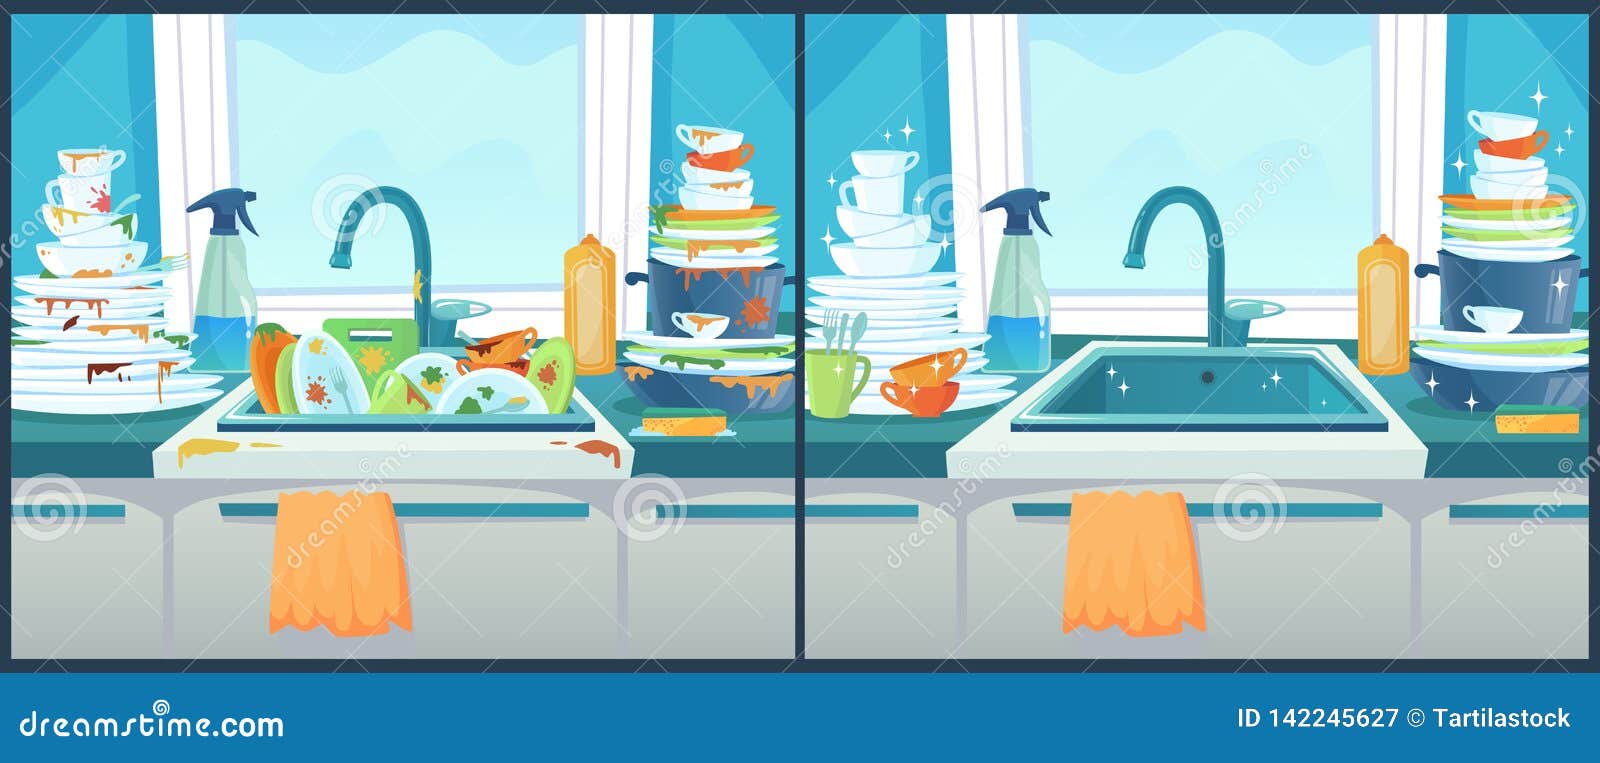 washing dishes in sink. dirty dish in kitchen, clean plates and messy dinnerware cartoon  